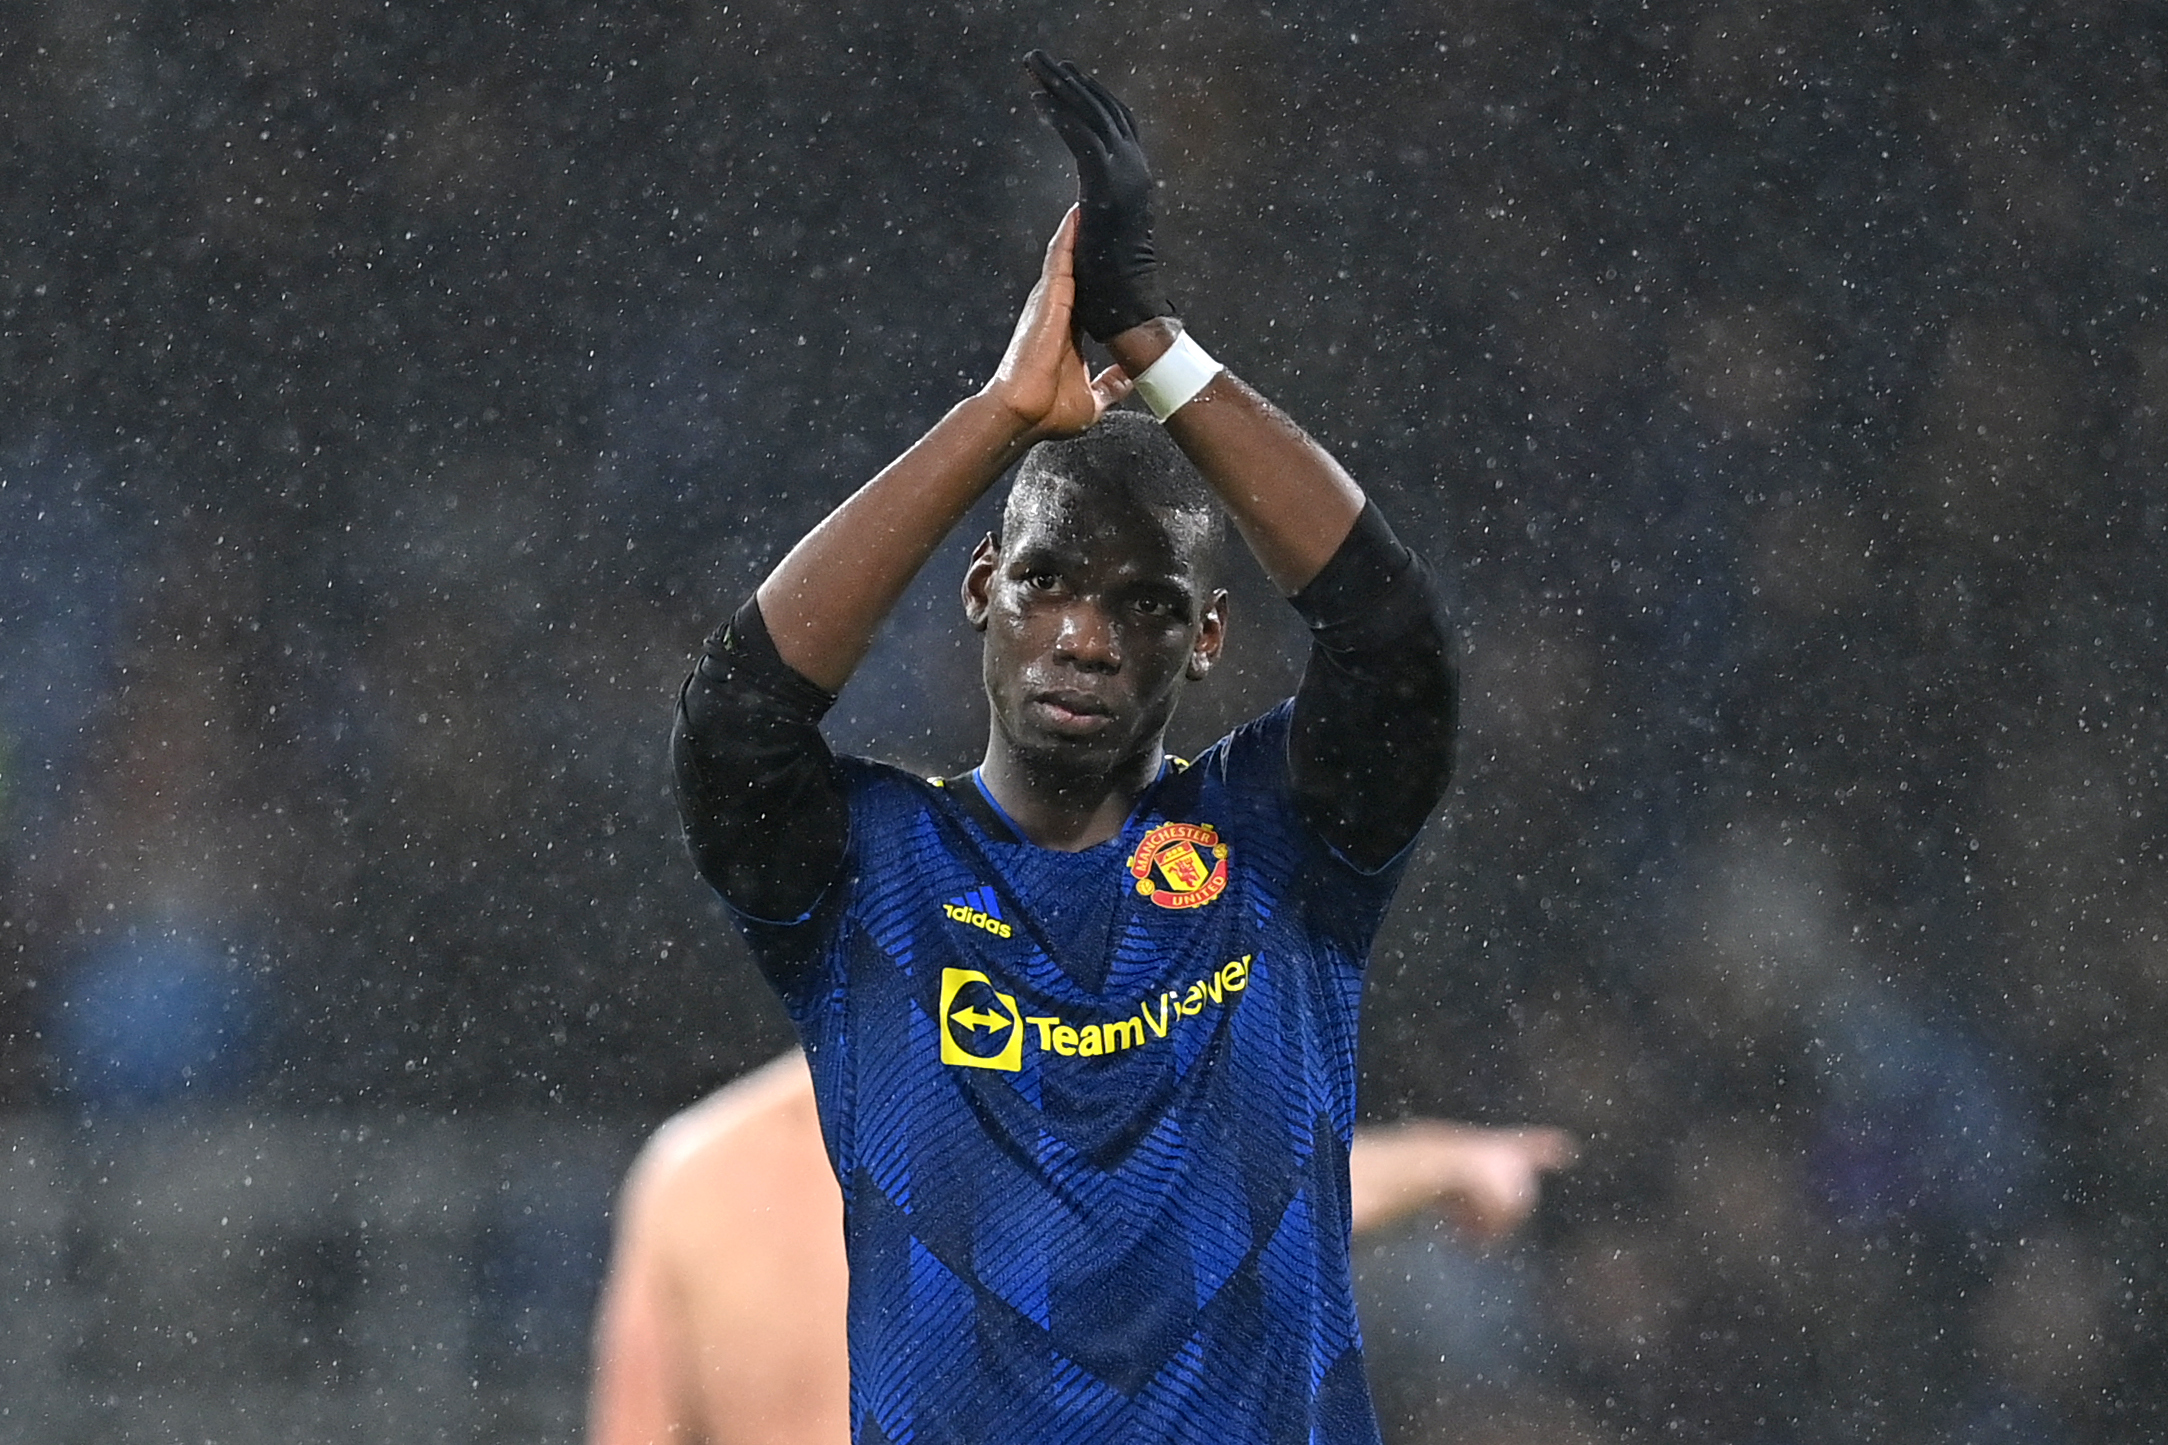 Manchester United superstar Paul Pogba rejects Manchester City offer amidst fears of a fan backlash.